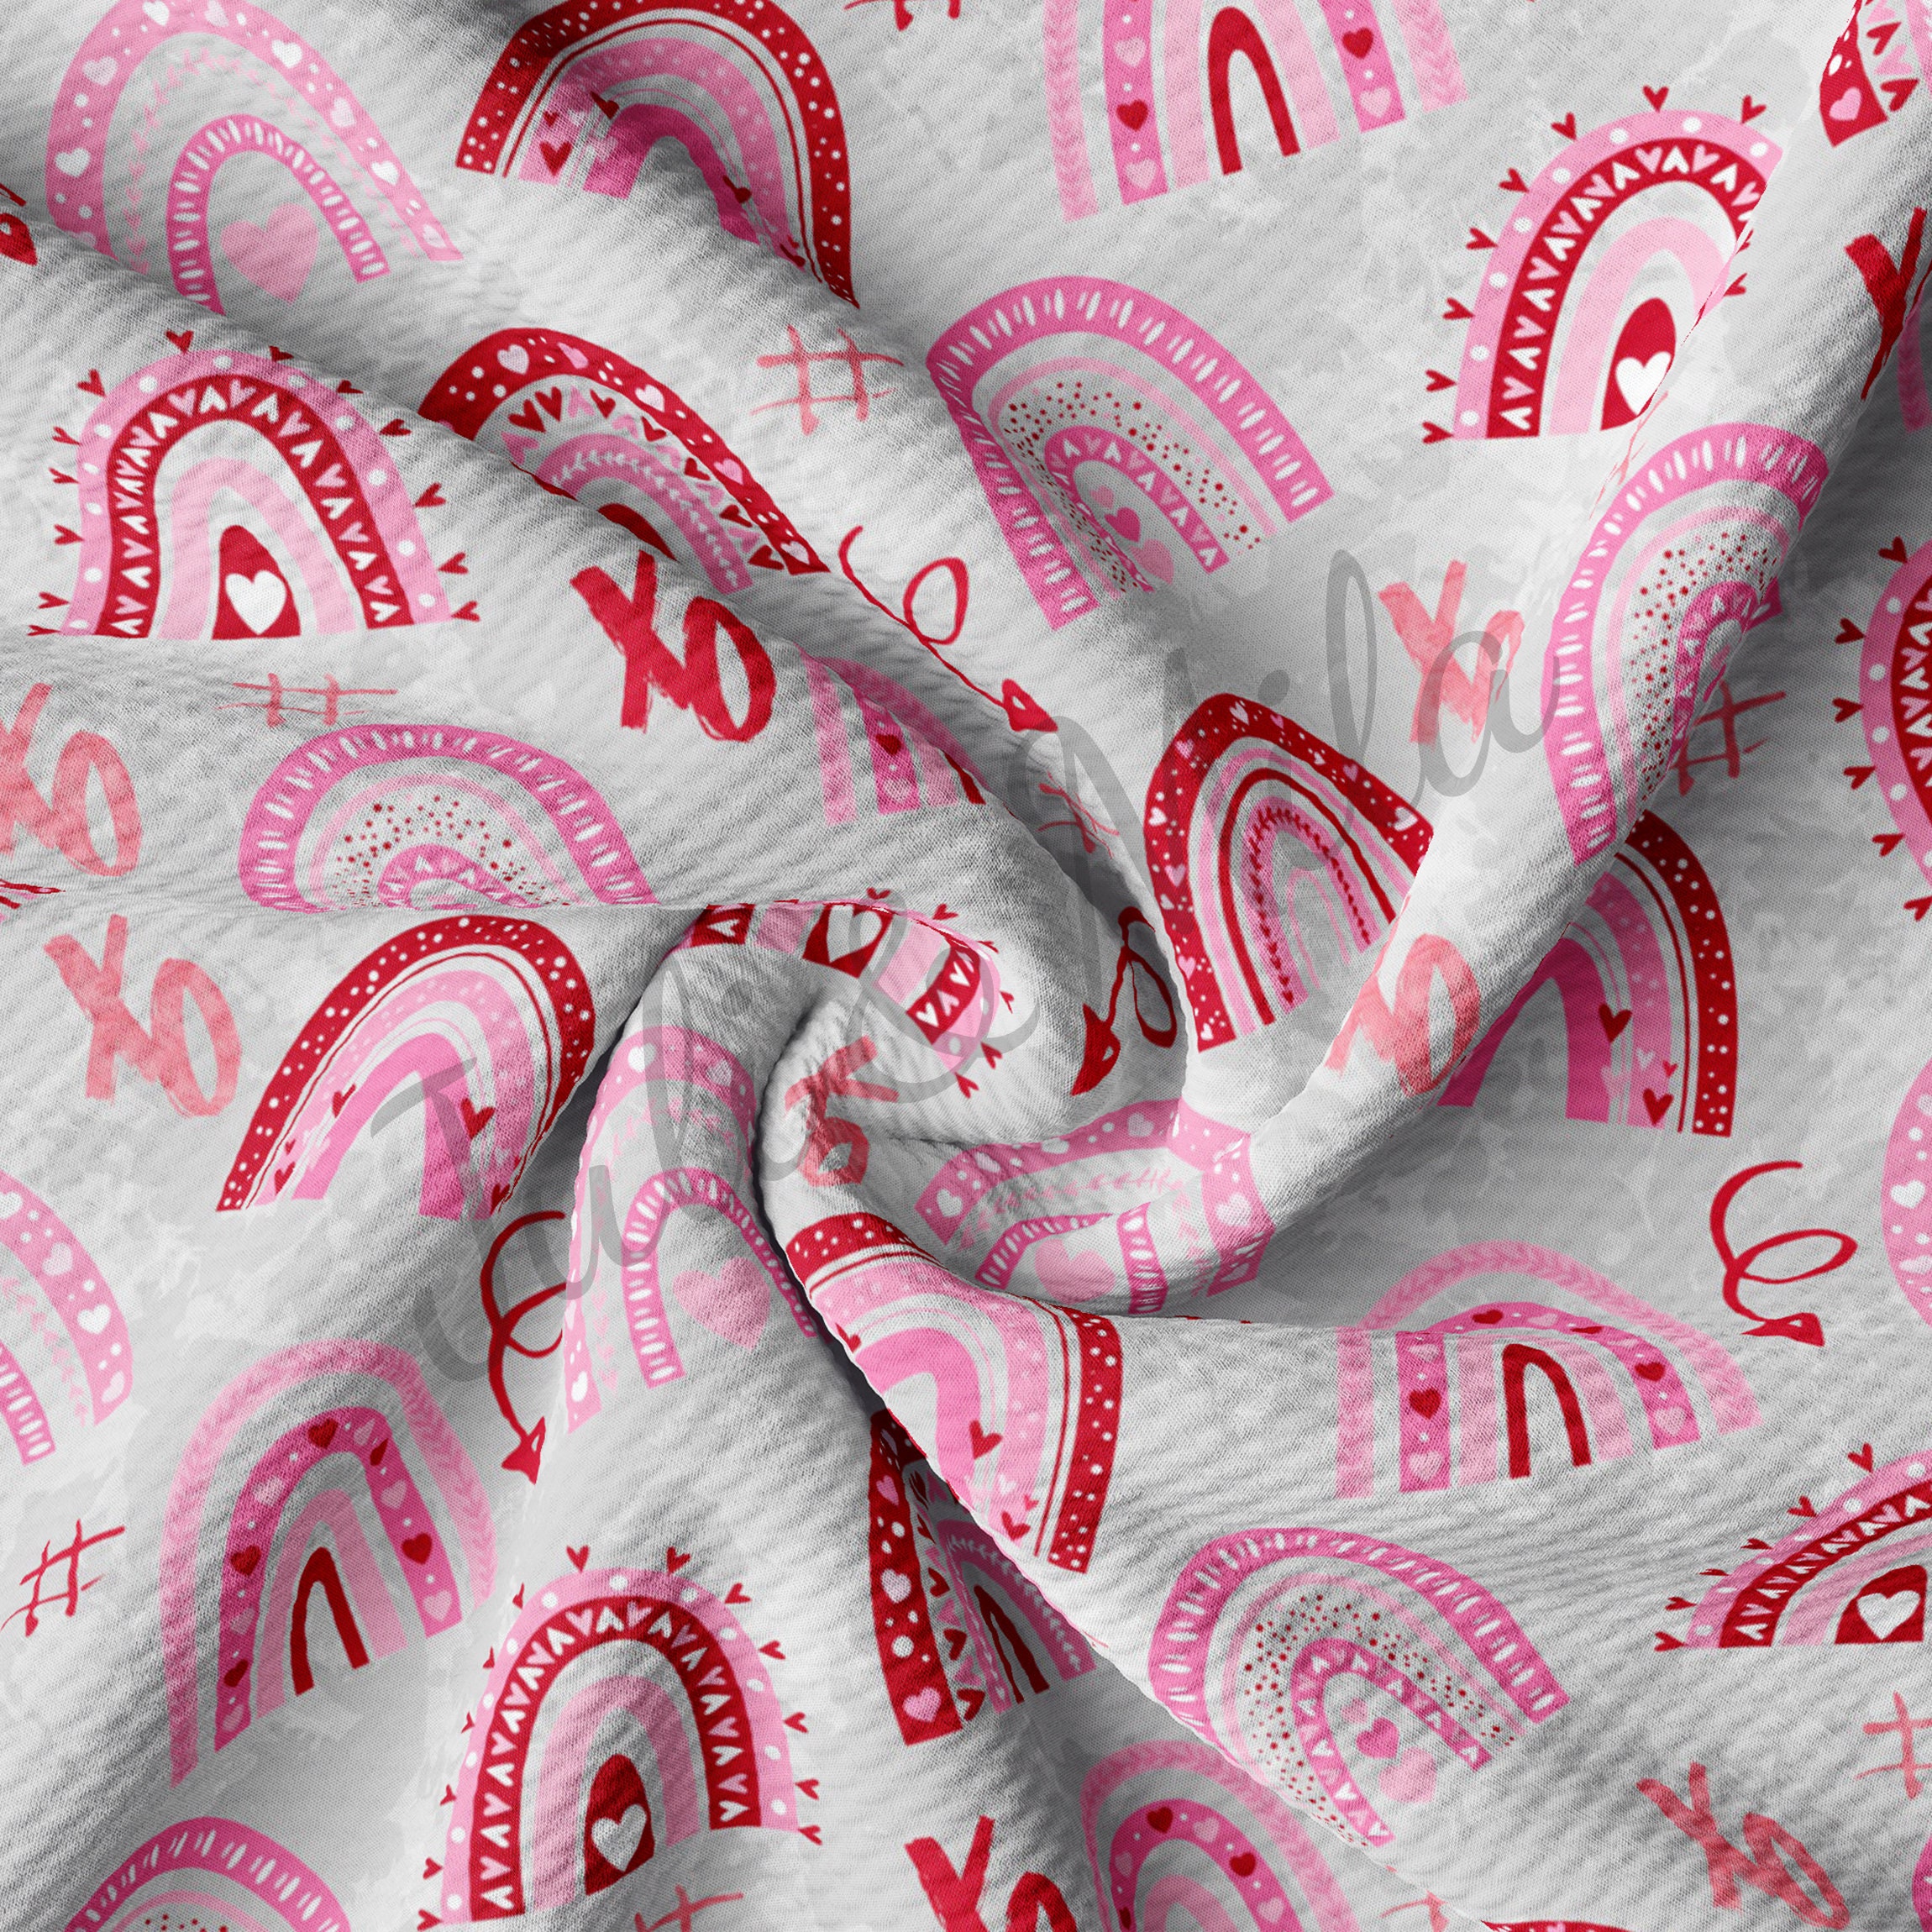 Bullet Printed Liverpool Textured Fabric Stretch Neon Pink White 1